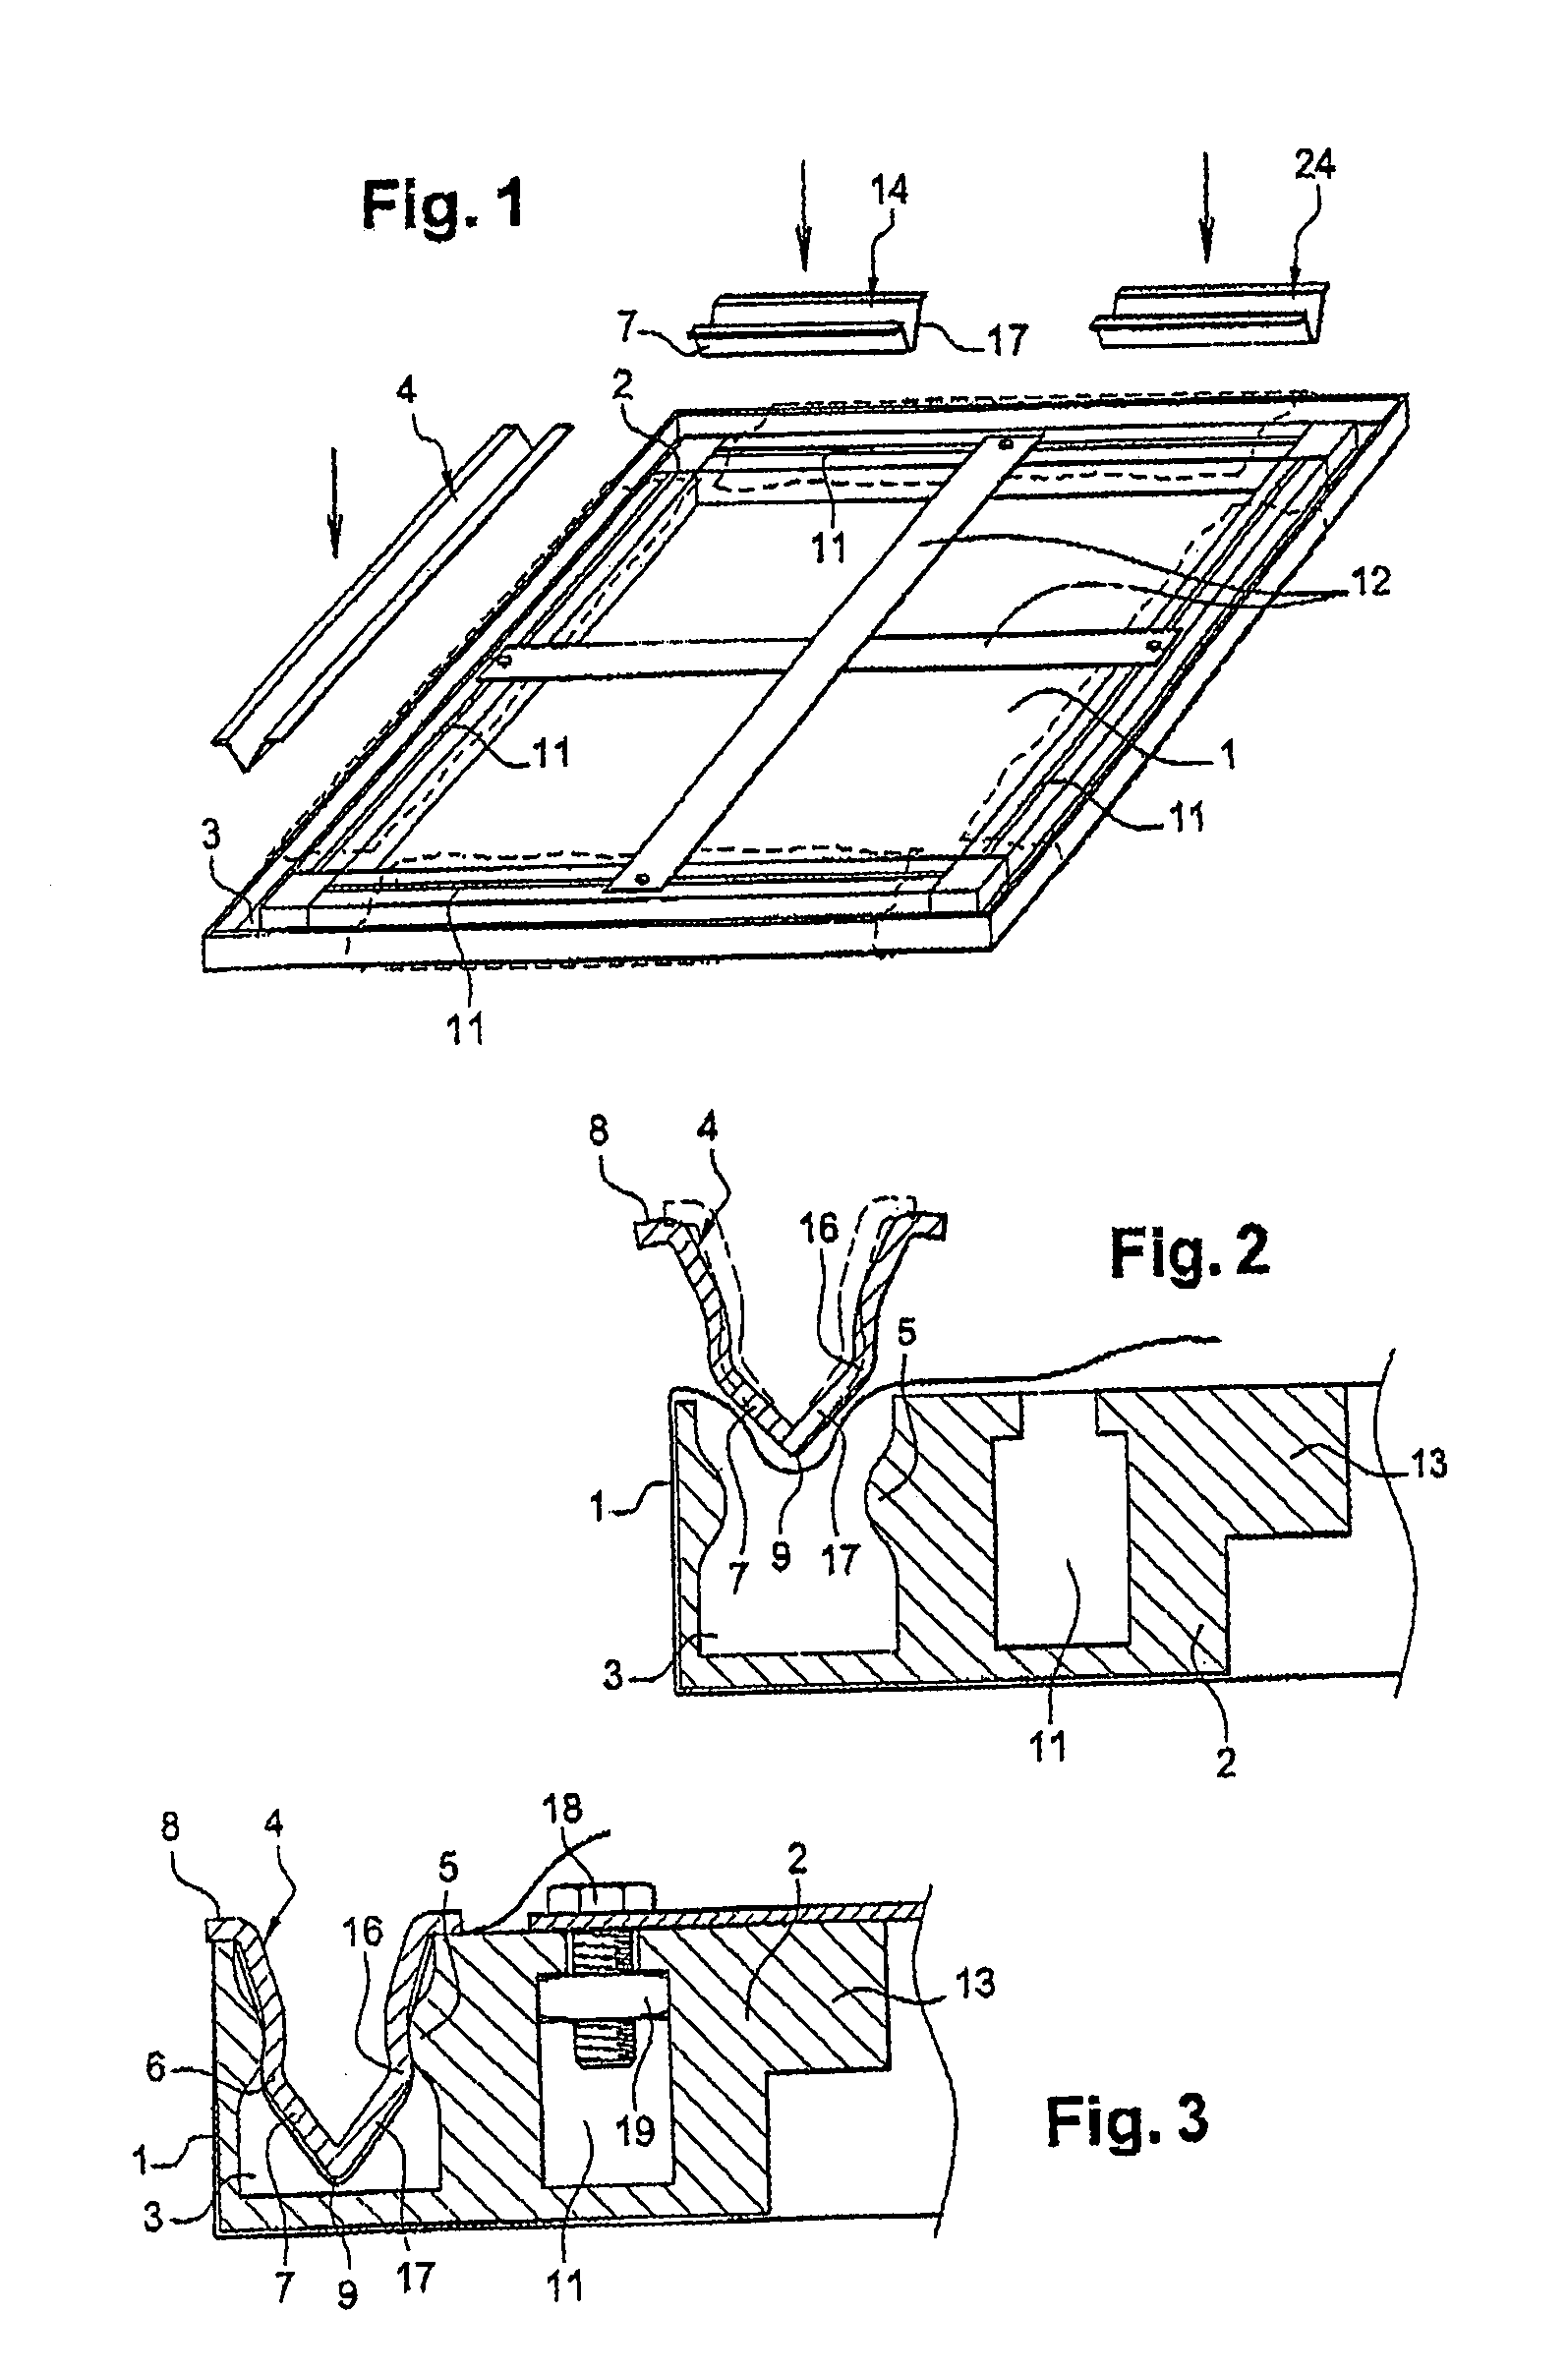 Device for tensioning and securing a canvas